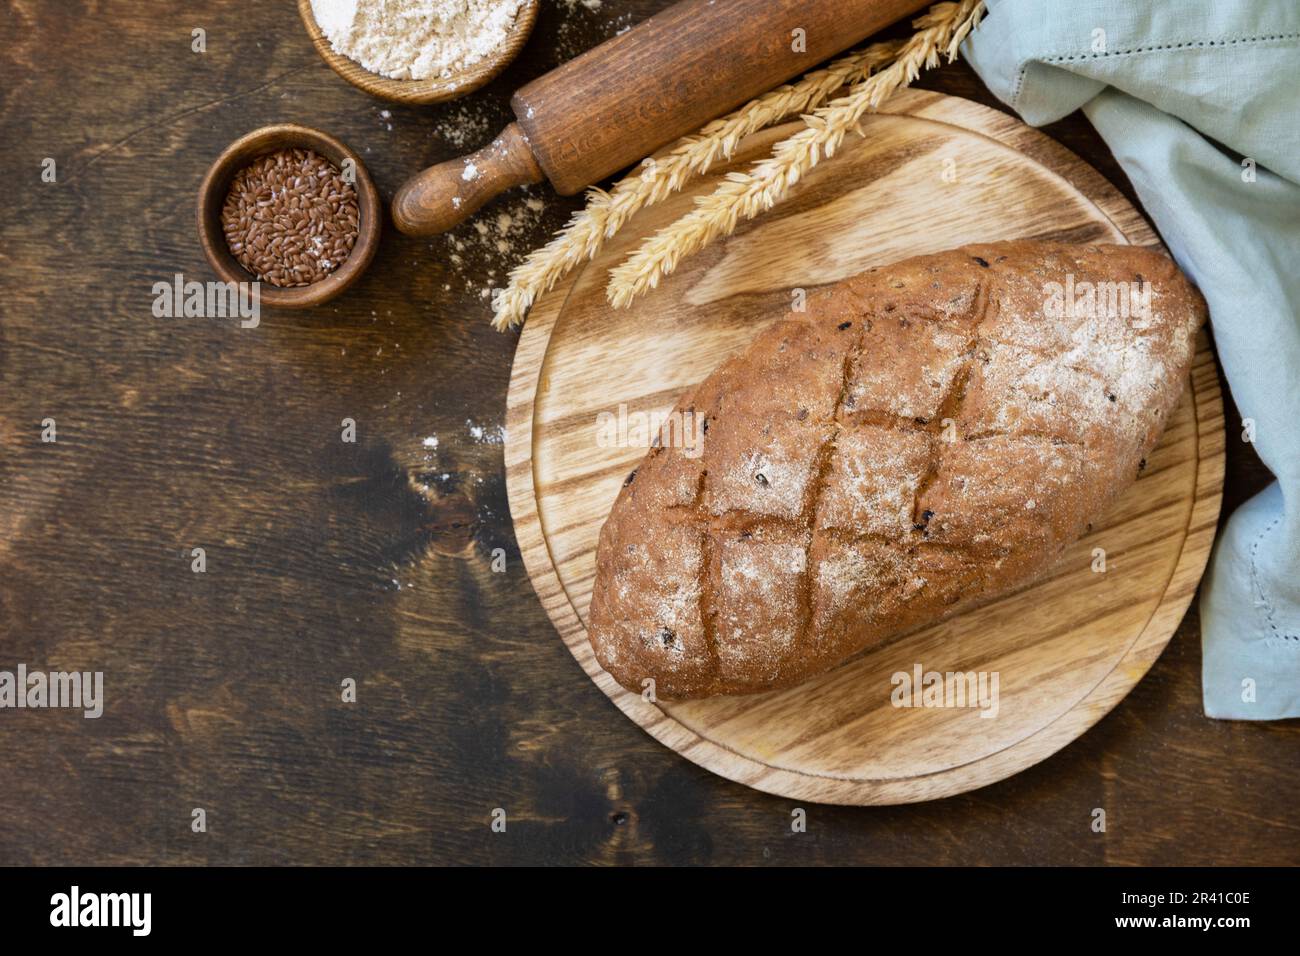 Homemade baking. Bread from whole wheat grains, wheat bran, seeds, bio-ingredients over rustic table background, healthy lifesty Stock Photo